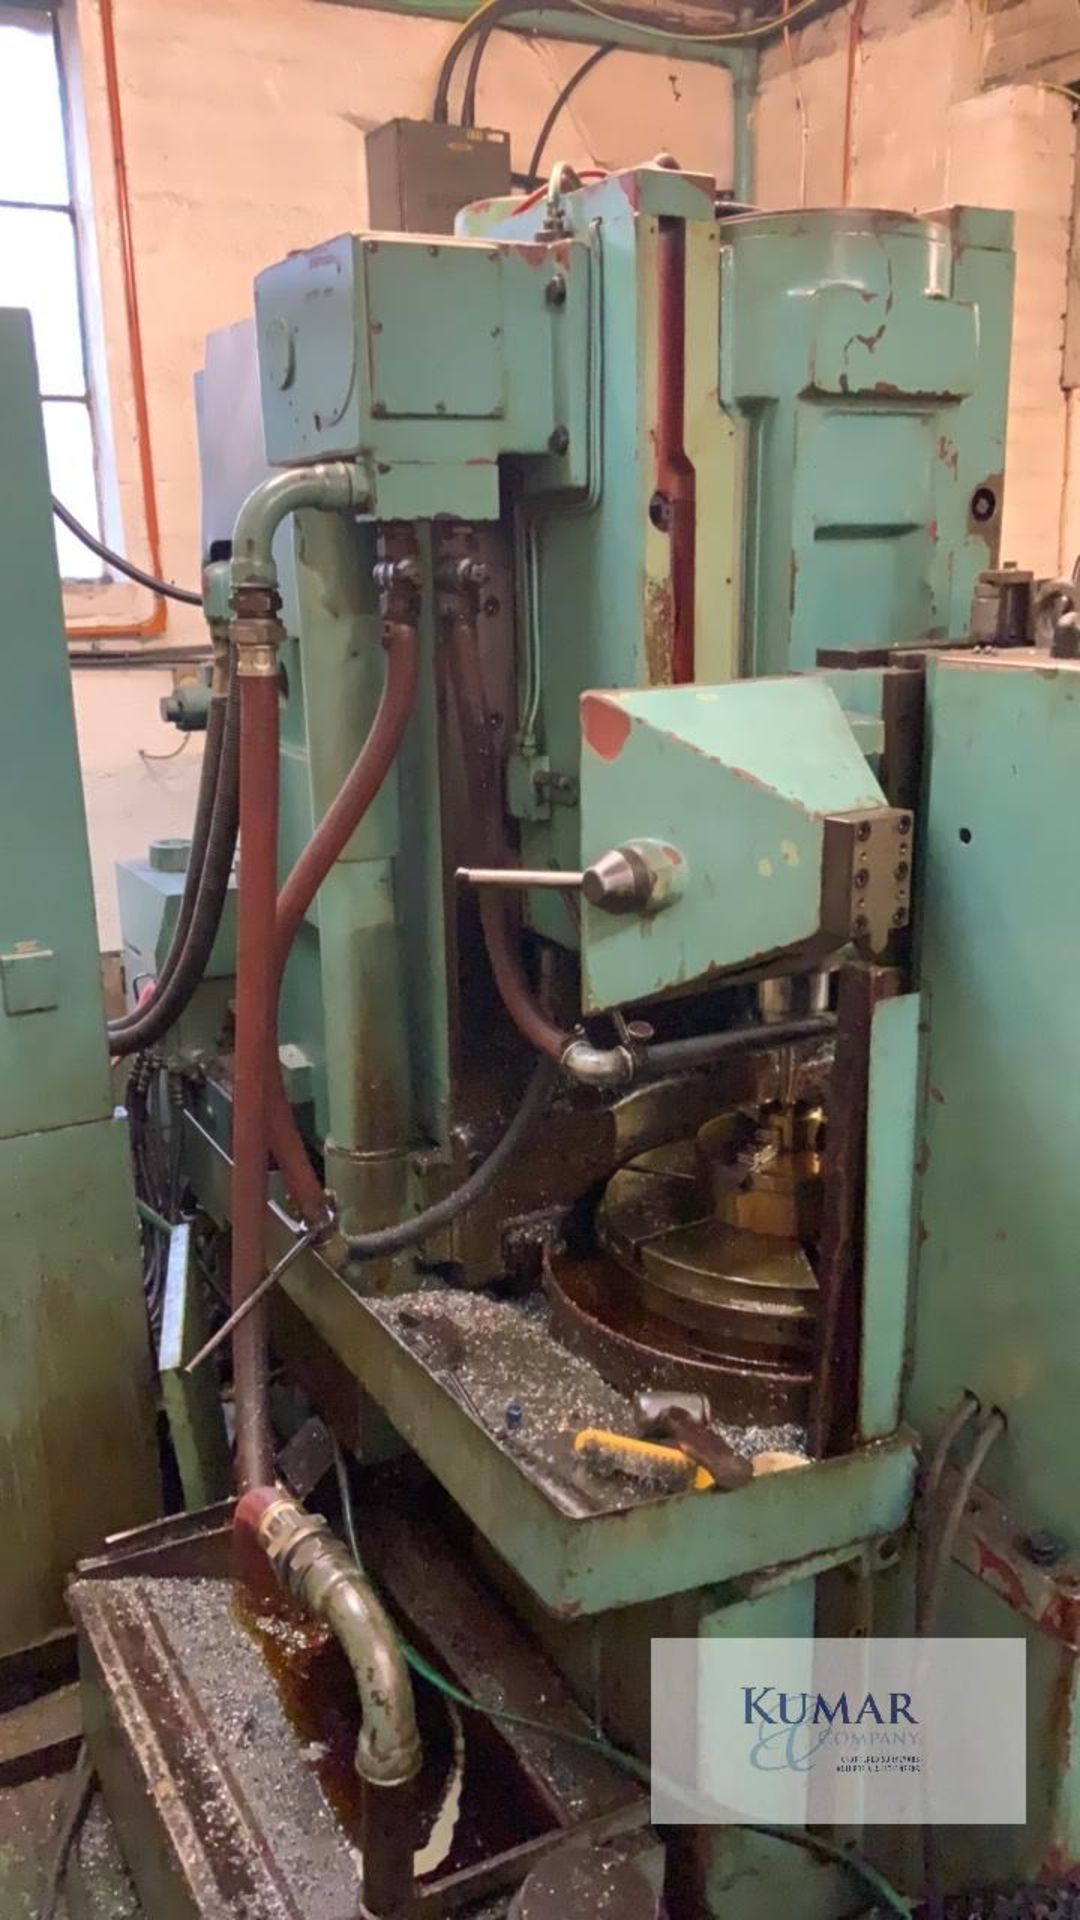 Tos Model No OHA 50 A Gear shaping machine with change gears - Collection Date Thursday 3rd March - Image 4 of 11